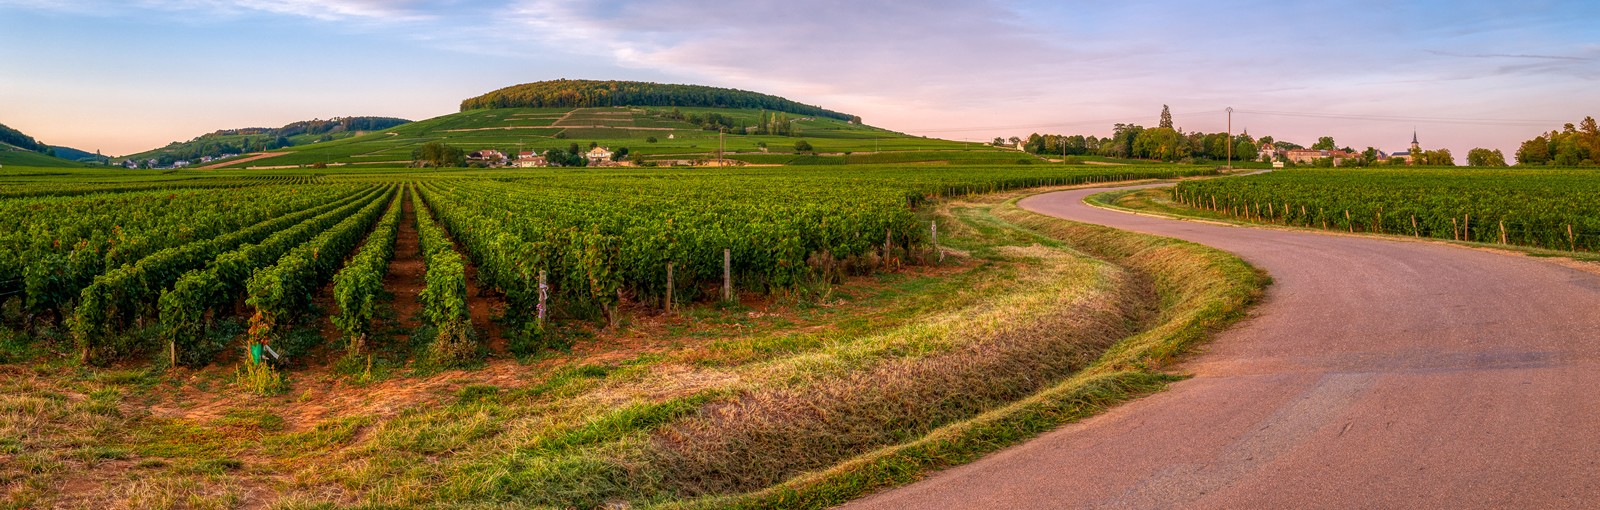 Tours 3 Nights in Burgundy: Sensations, Exploration, Castles and Wines! - Burgundy - Multiday tours from Paris